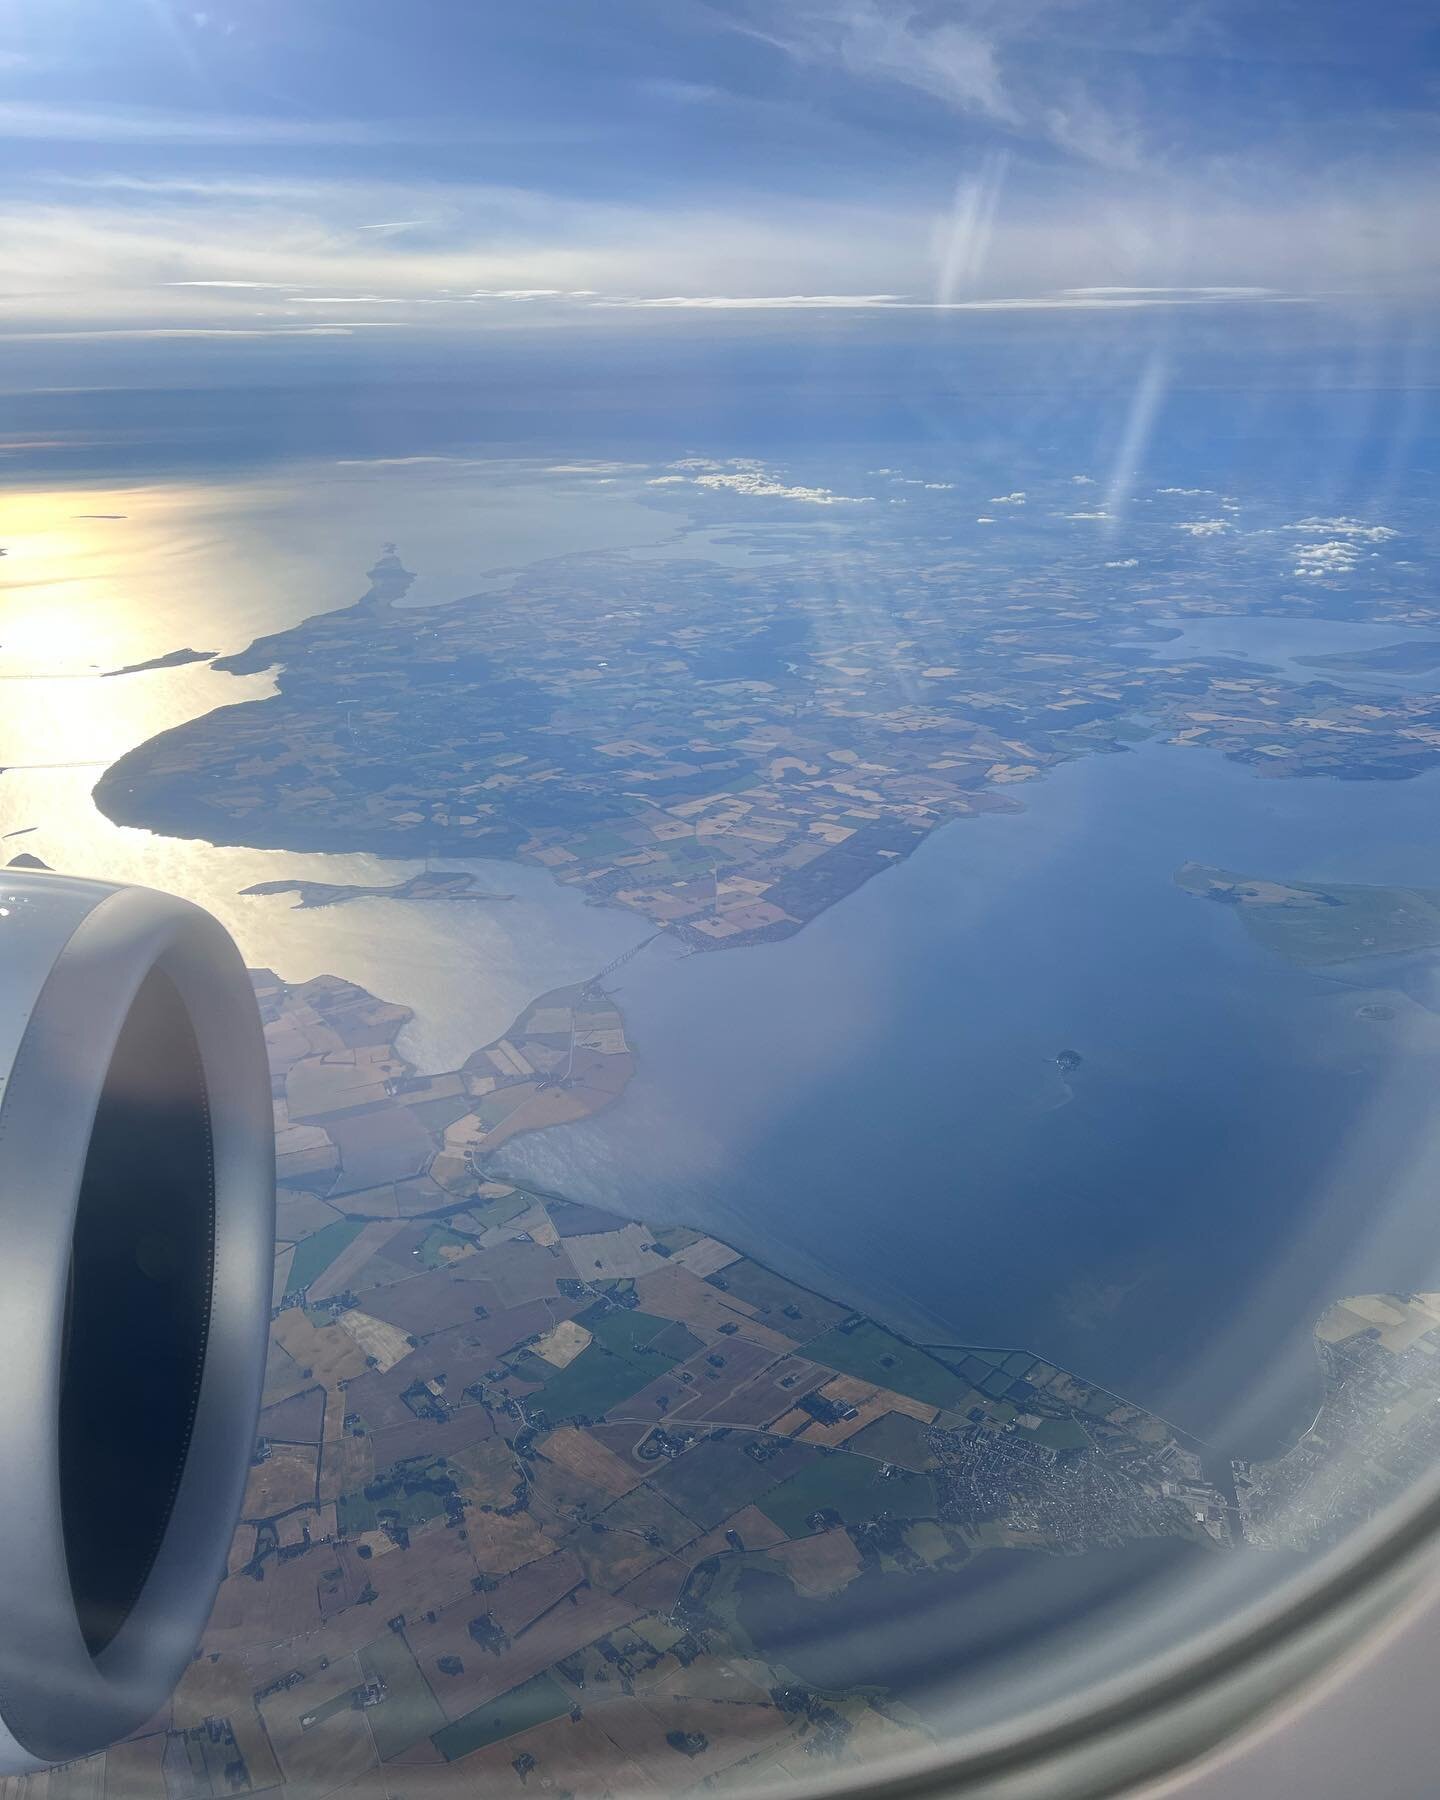 Flying from Germany into Denmark, I don&rsquo;t remember ever having been taken by the beauty of this country from above. I&rsquo;m in love all over again. Our lodging, Kong Arthur Hotel, is so charming. Looking forward to a full day of exploring Nyh